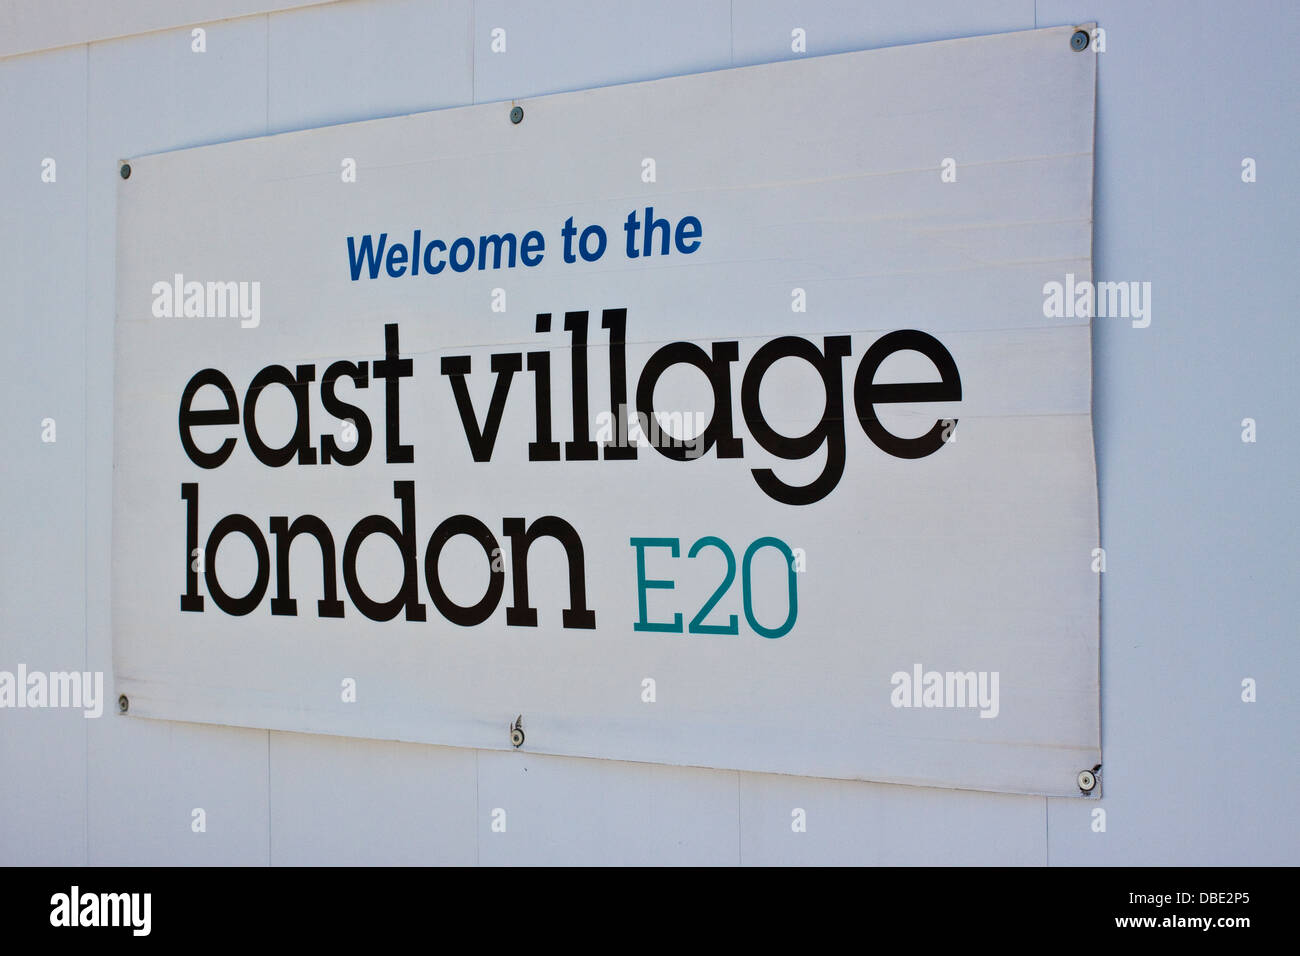 Welcome to the east village london E20 sign on Celebration avenue, Stratford London Stock Photo